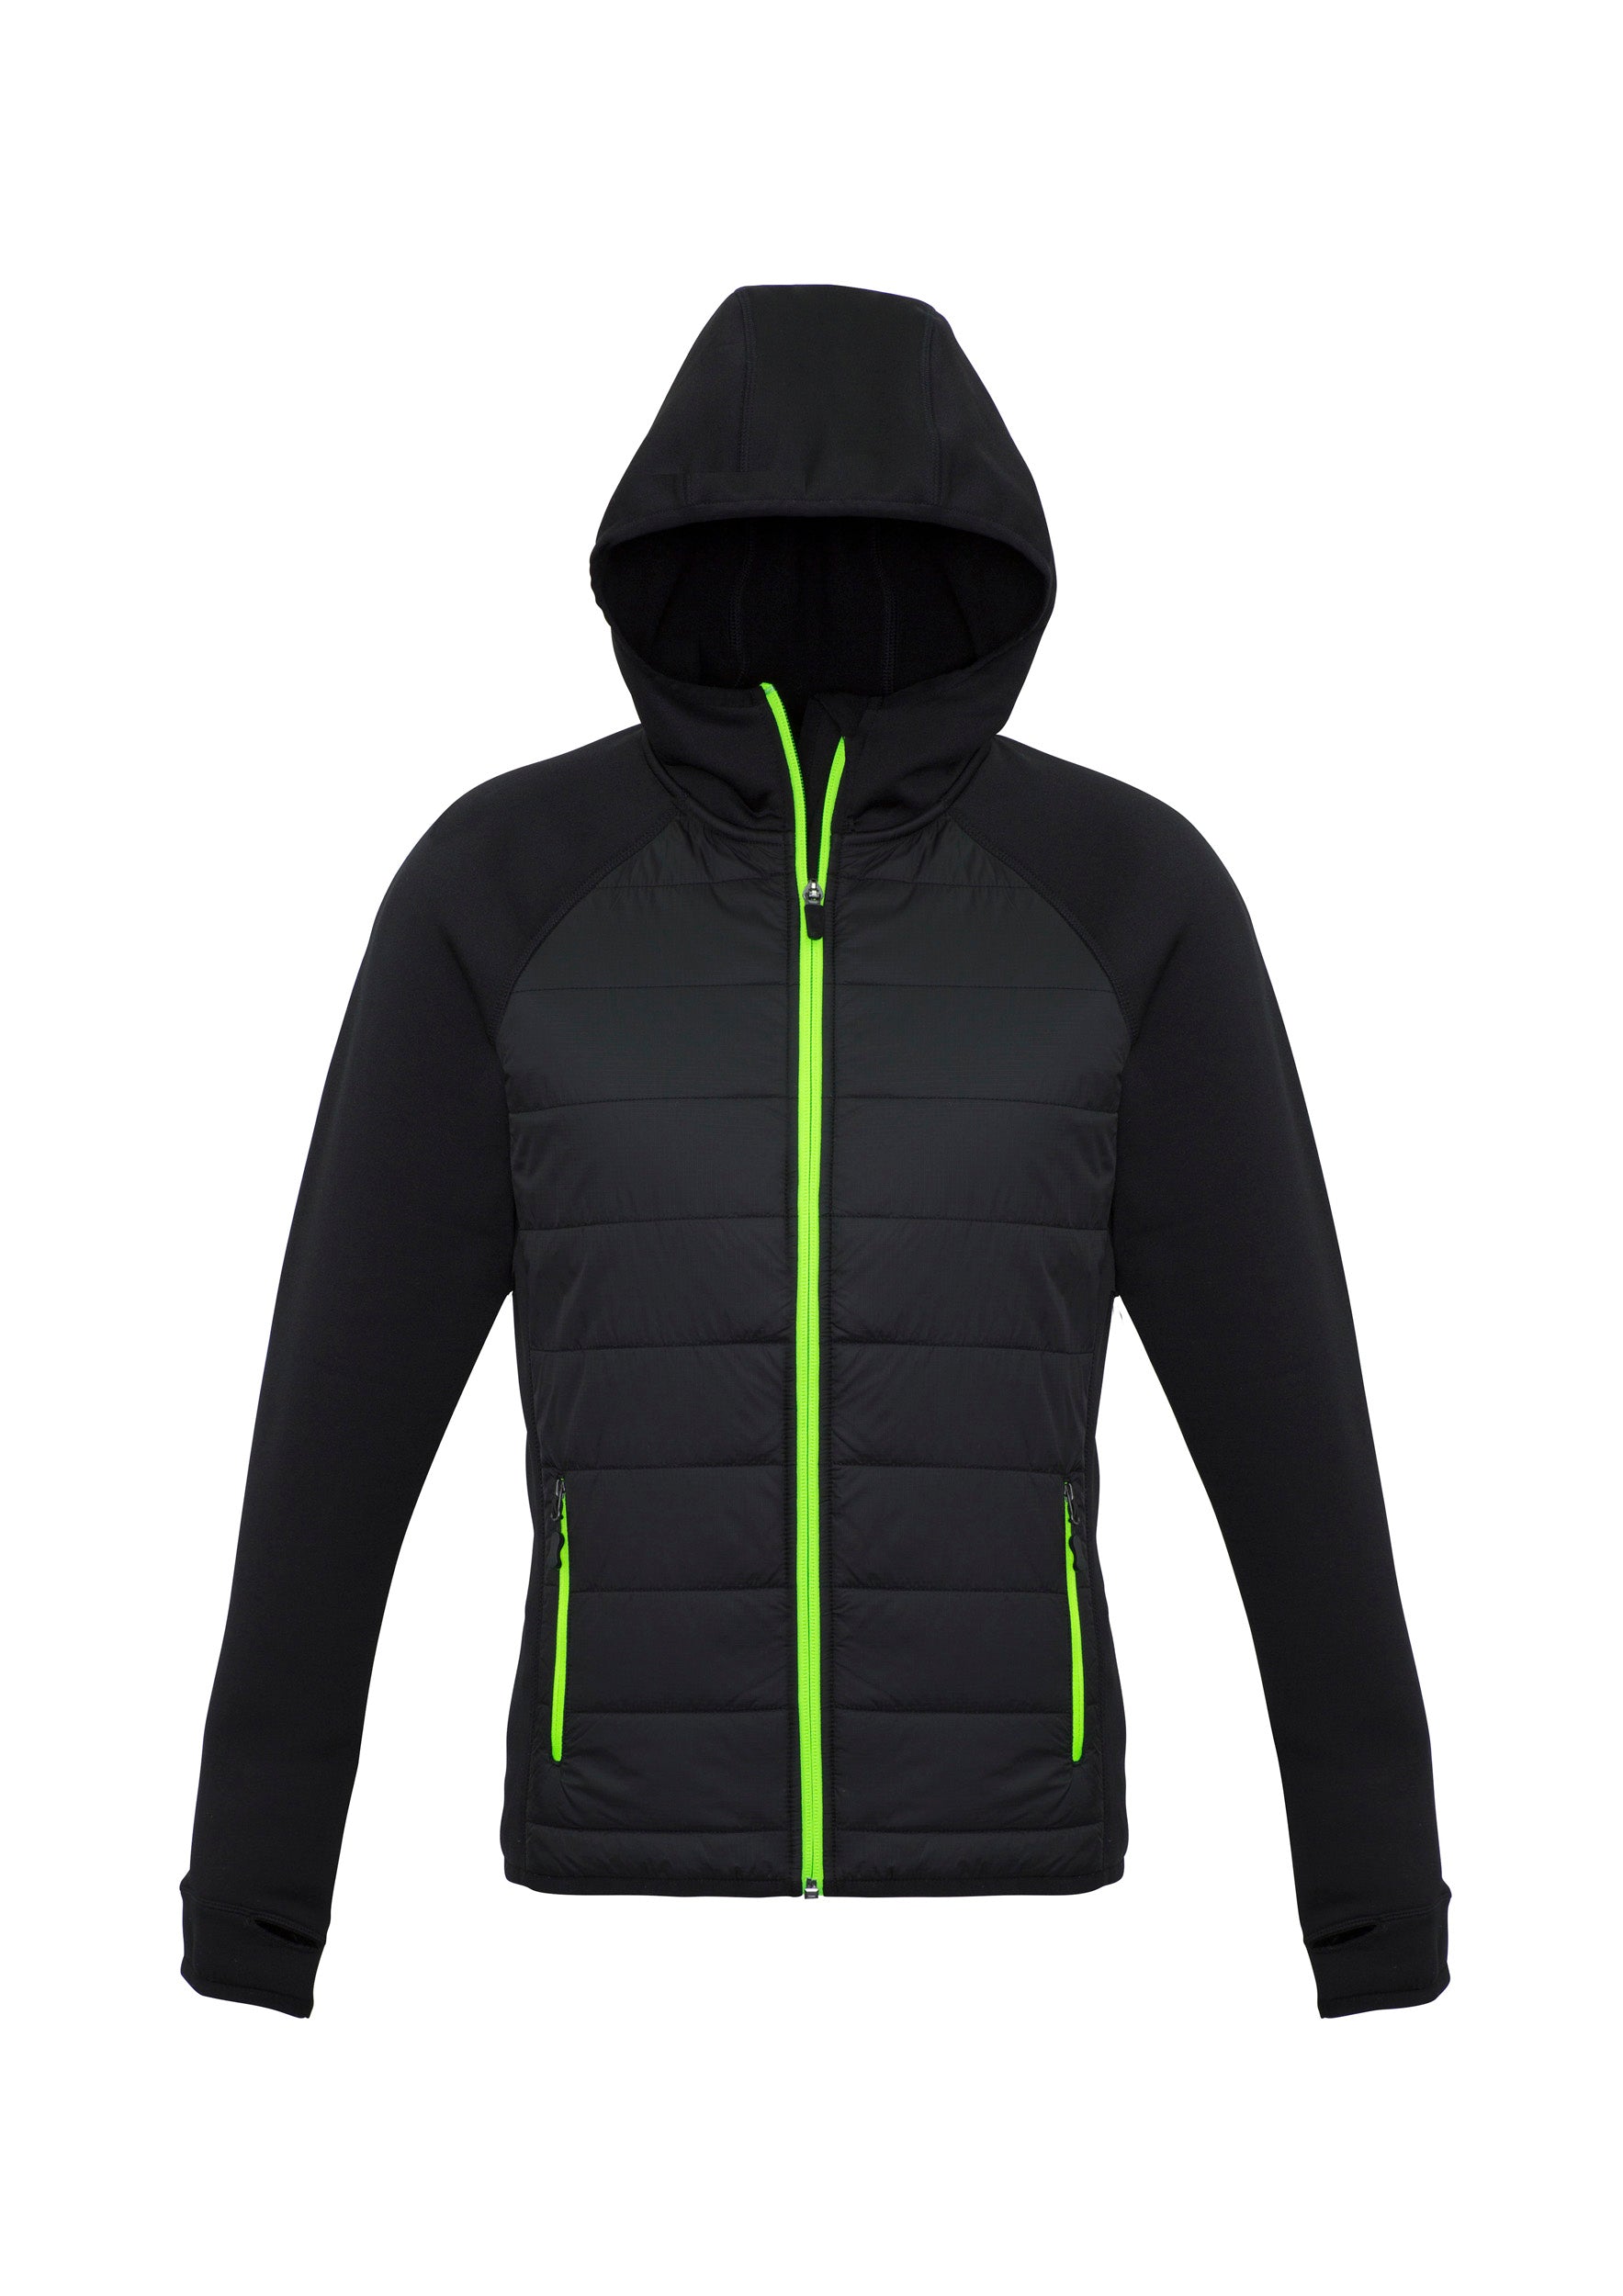 Womens Stealth Jacket